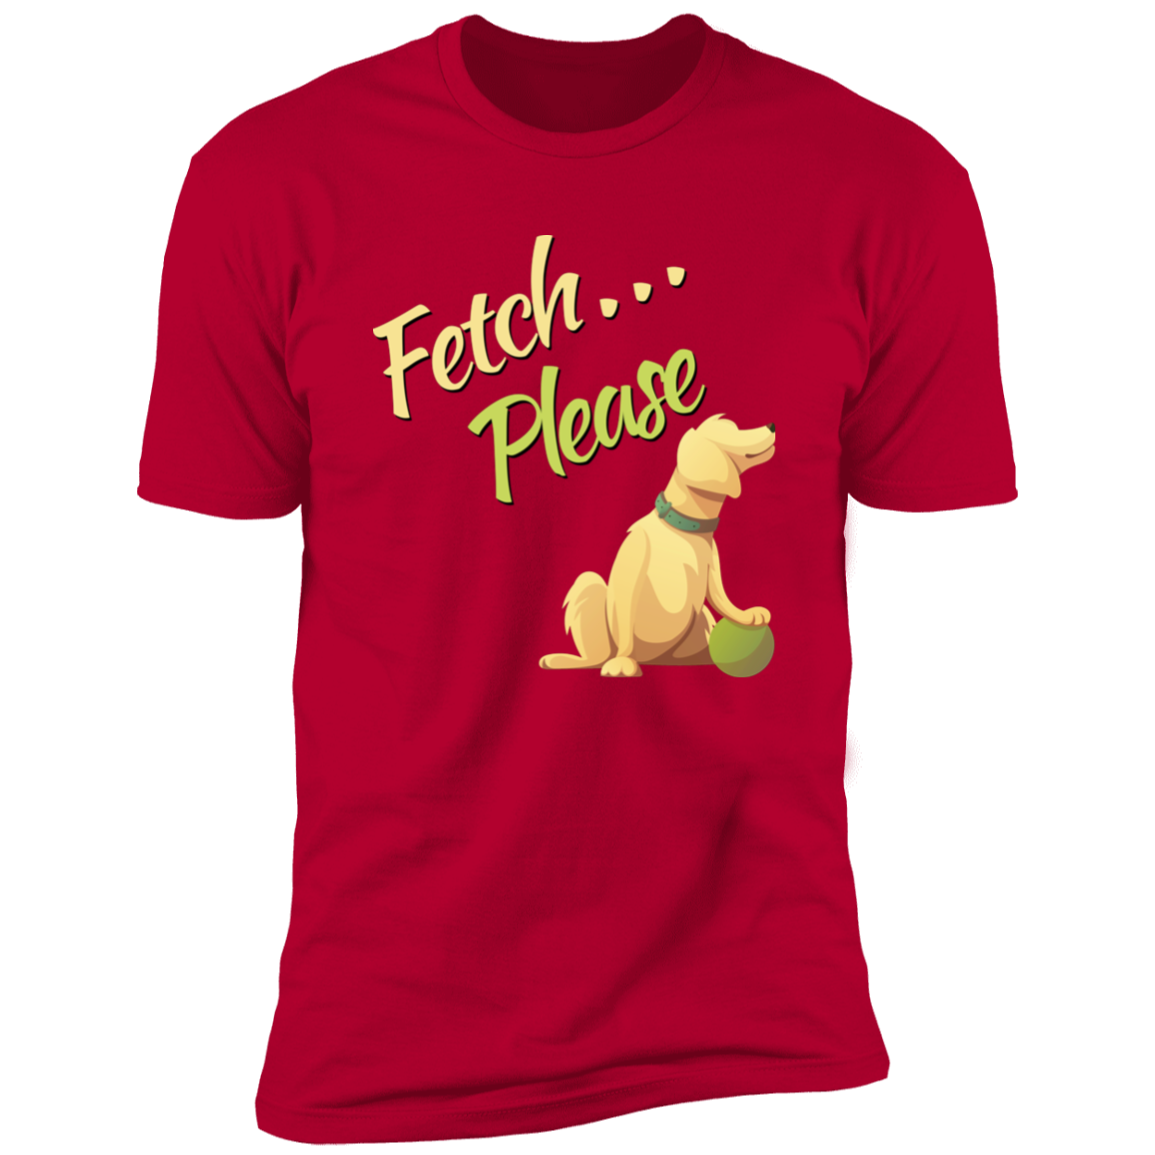 Fetch Please funny dog t-shirt, funny dog shirt for humans, in red